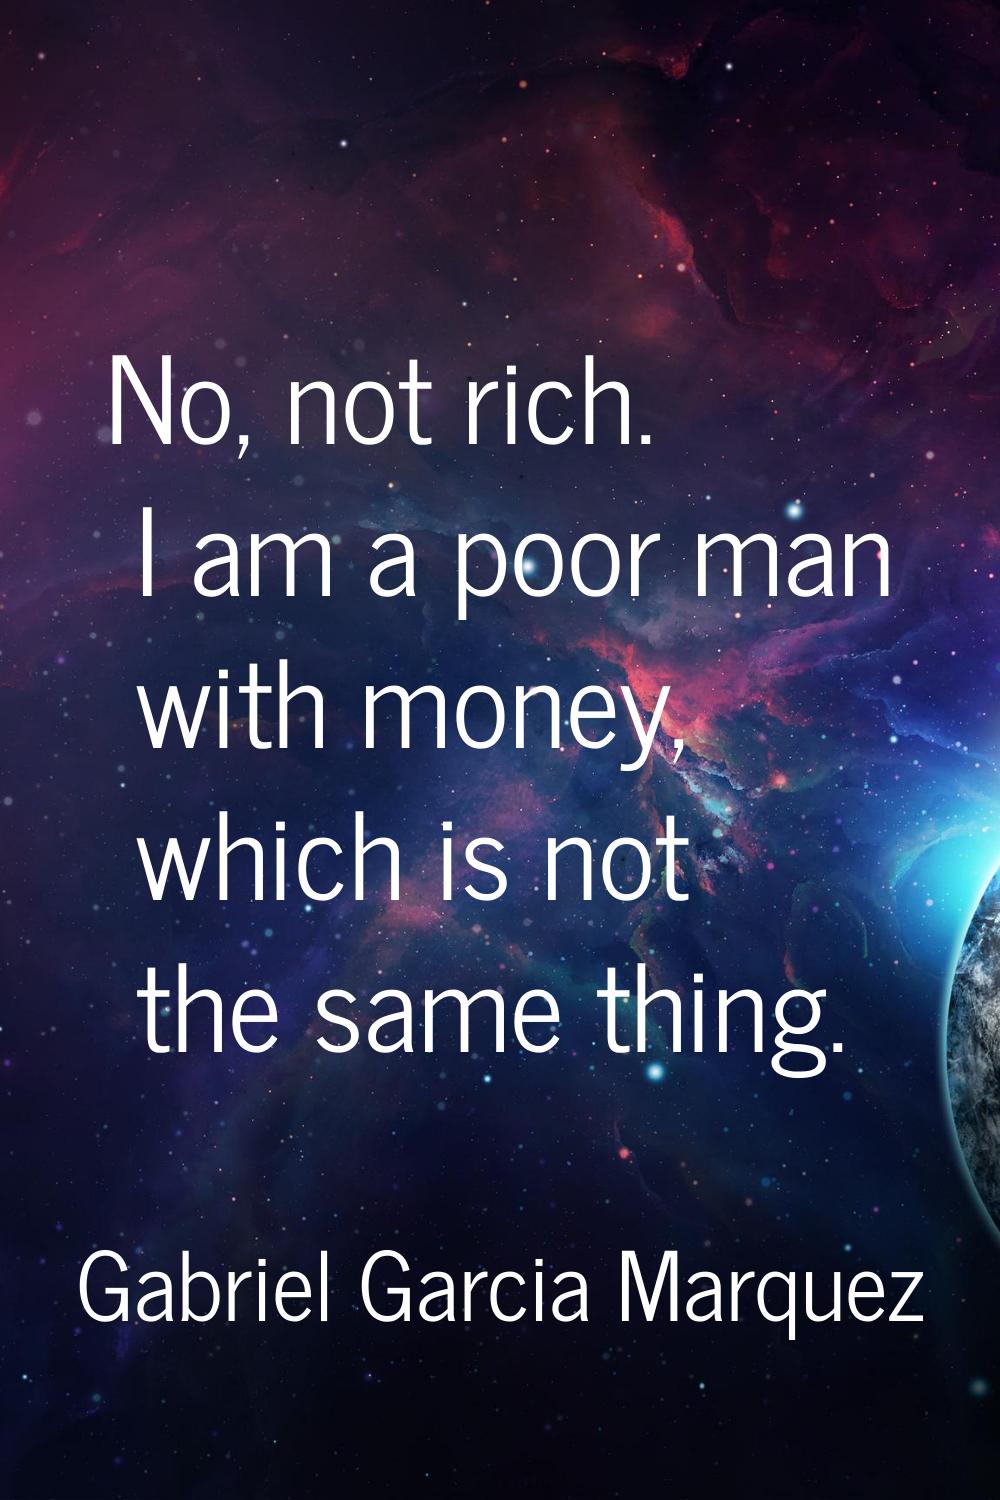 No, not rich. I am a poor man with money, which is not the same thing.